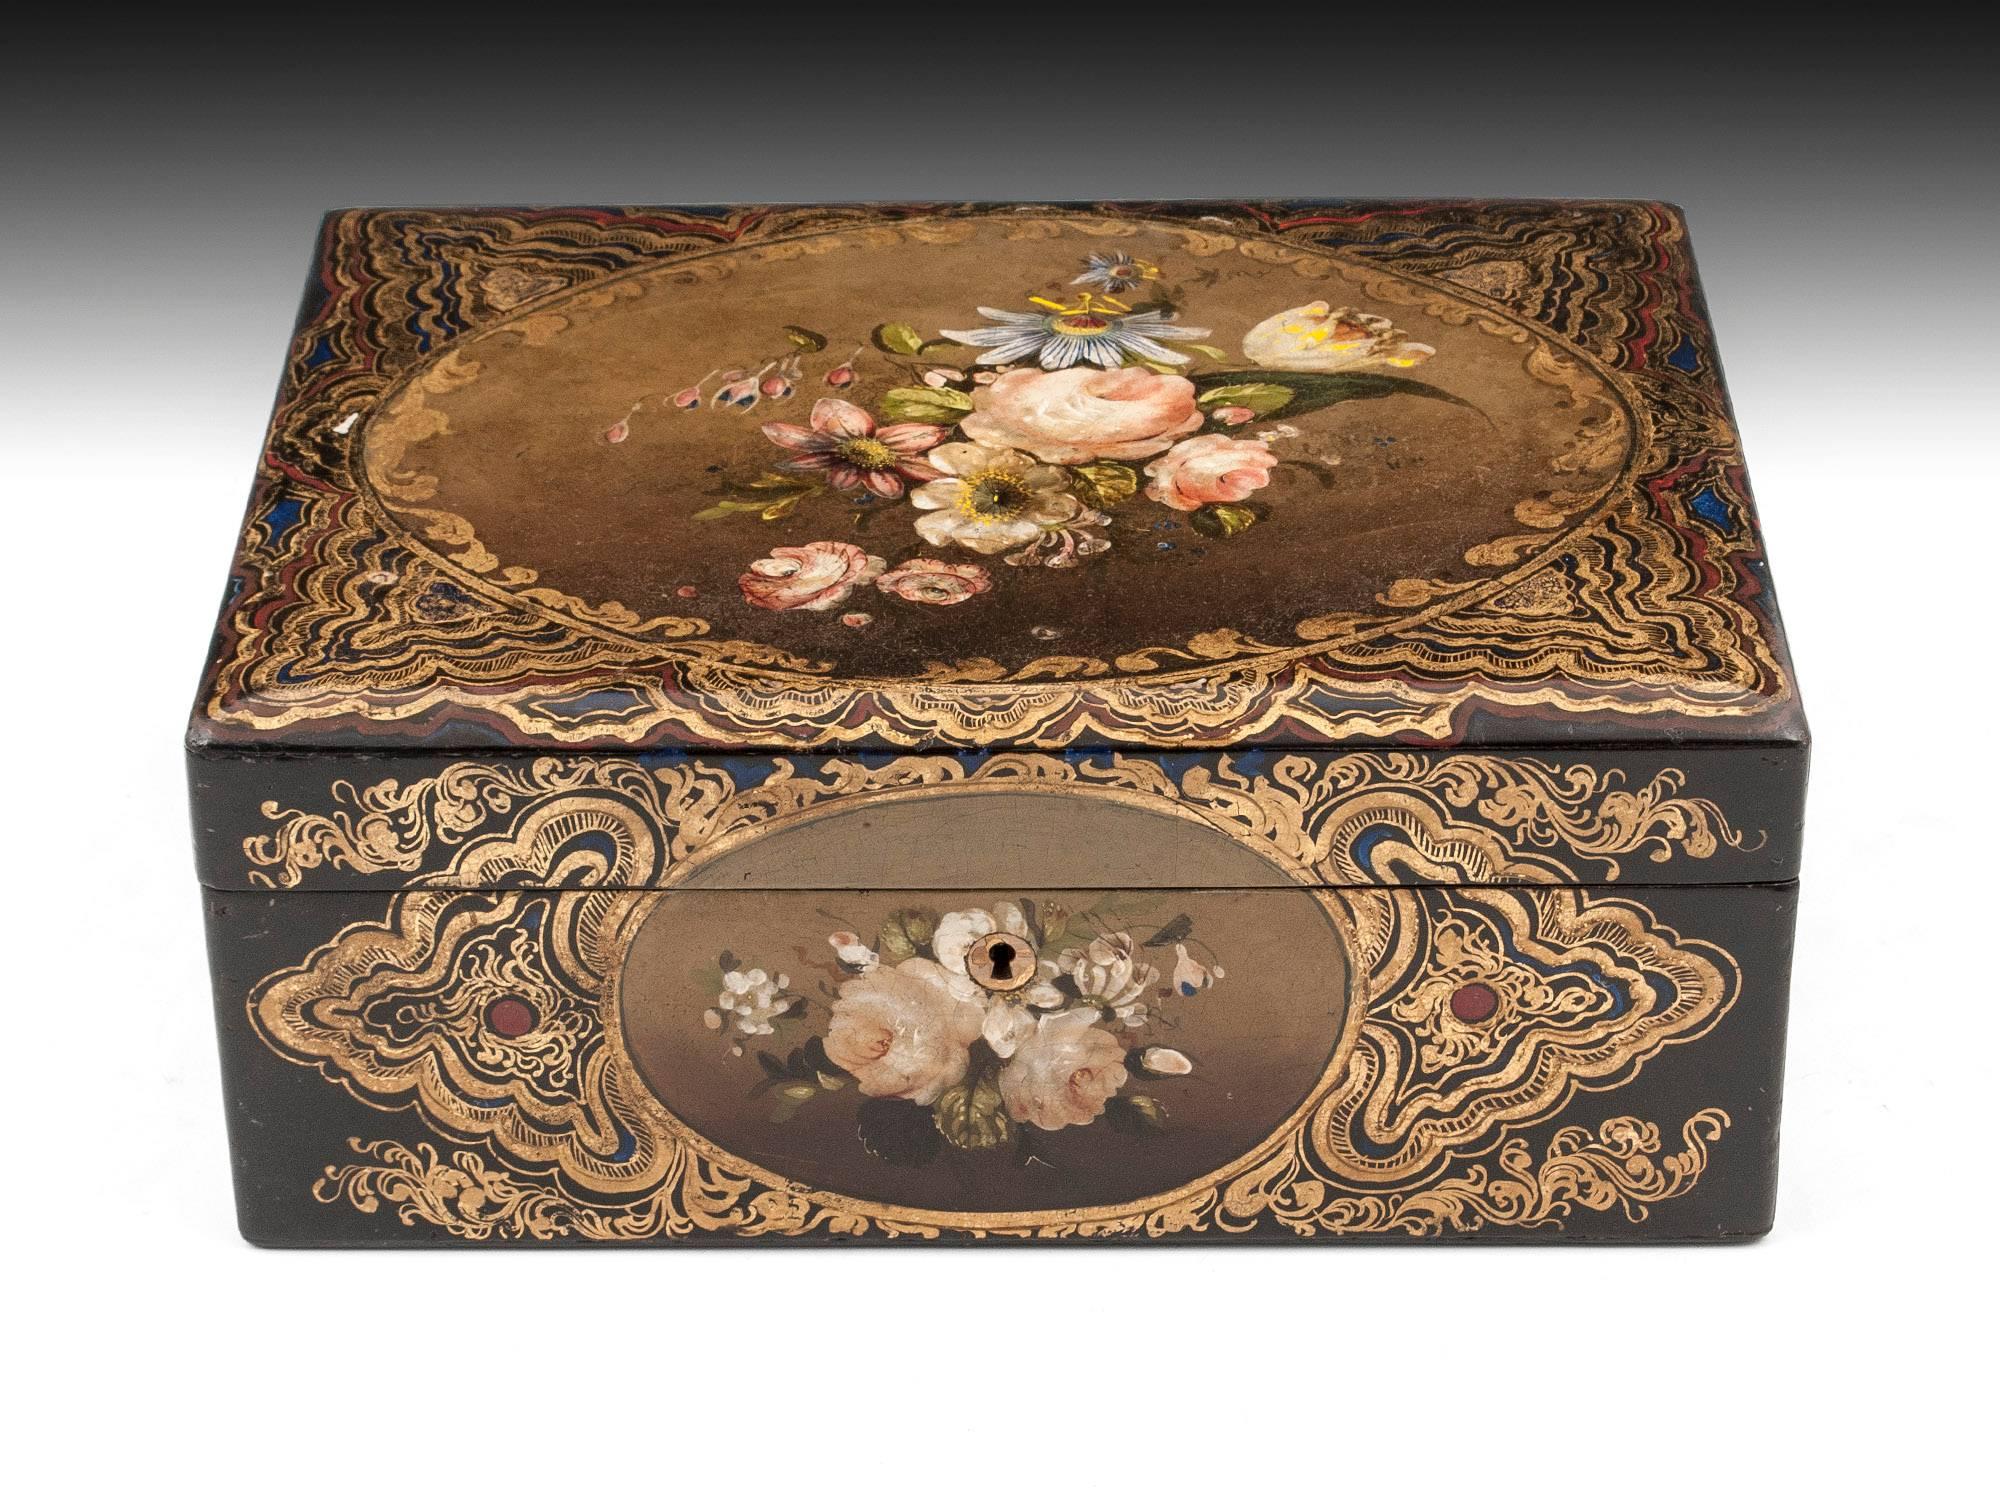 Papier mache sewing box painted with sprays of flowers, all brought to life with oval-framed trailing & scrolling gold leaf decoration, with beautiful vibrant colors and detailed pictures. 

Sewing box interior is equally as stunning as the